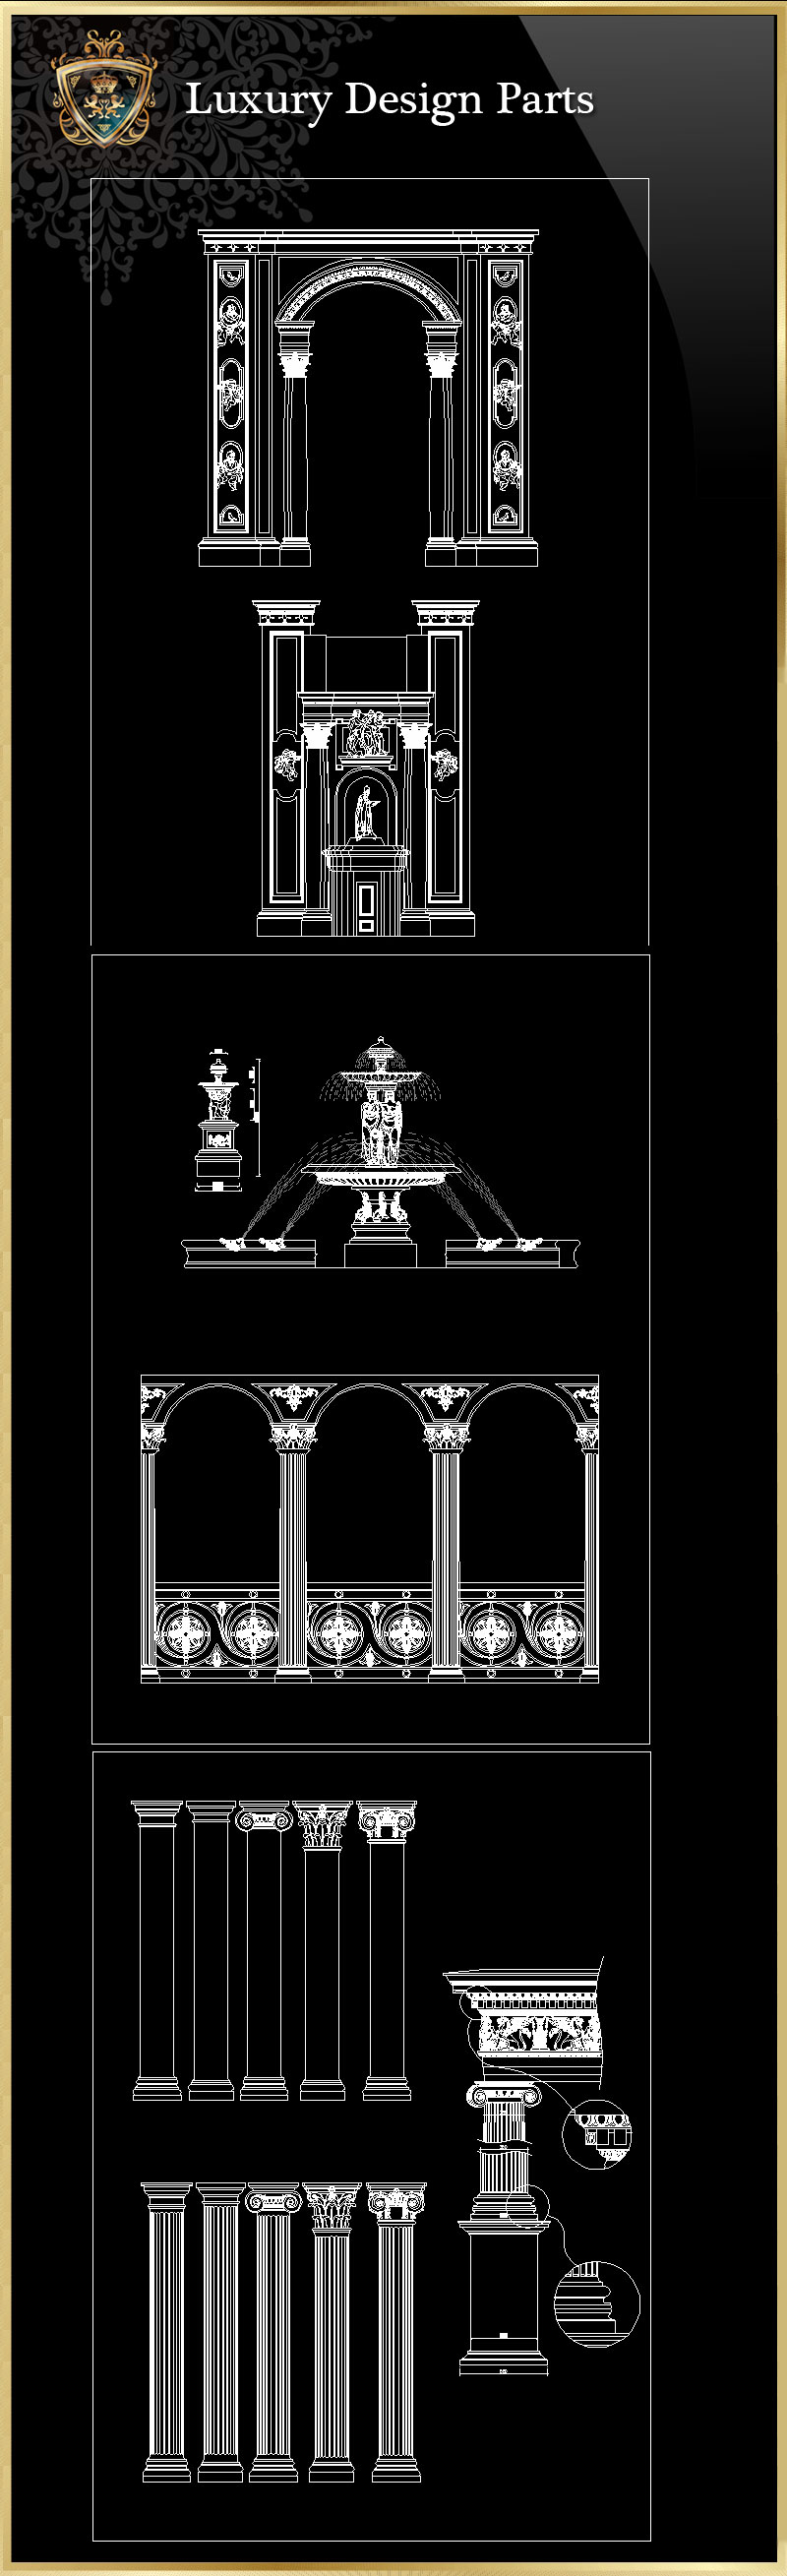 ★【Luxury Design Parts 3】Download Luxury Architectural Design CAD Drawings--Over 20000+ High quality CAD Blocks and Drawings Download!